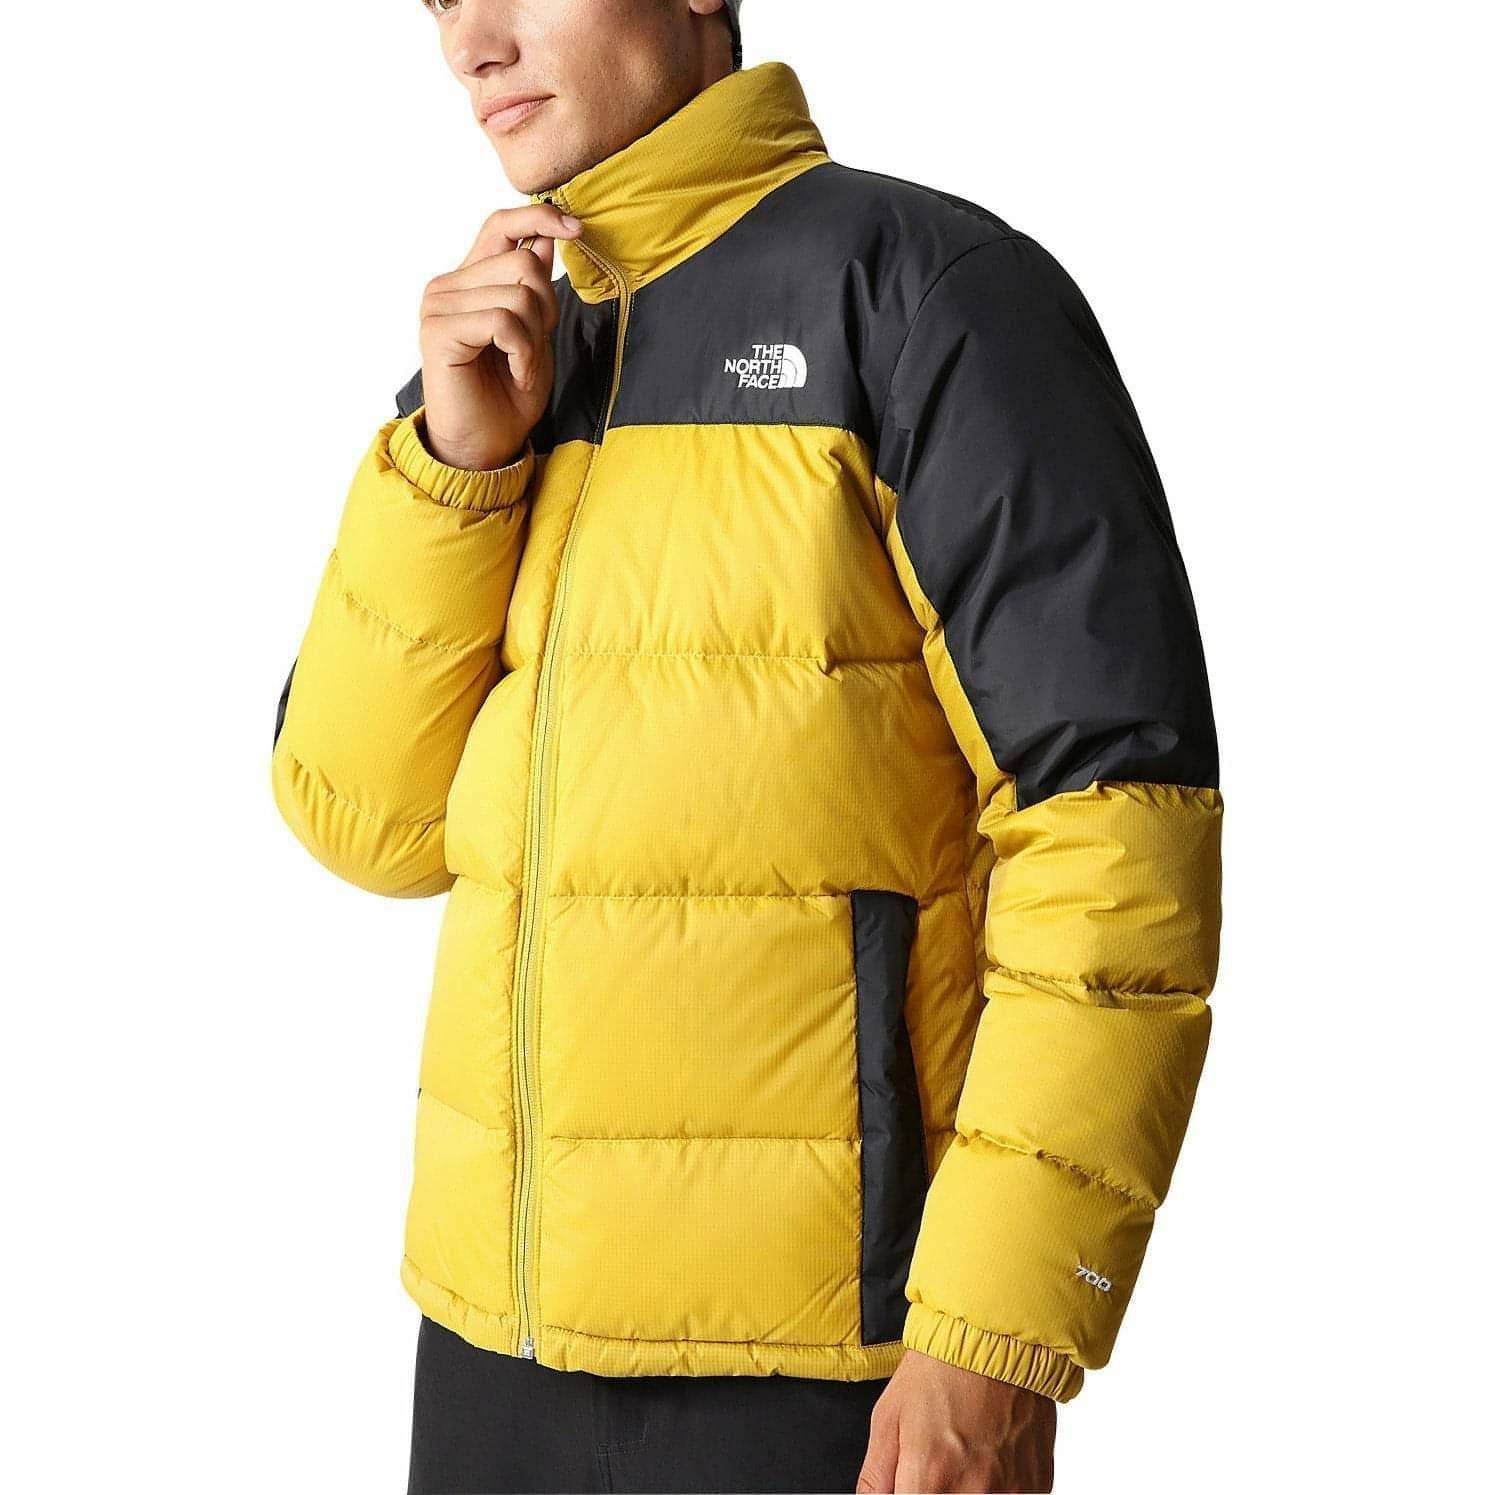 The North Face Diablo Mens Down Jacket - Yellow